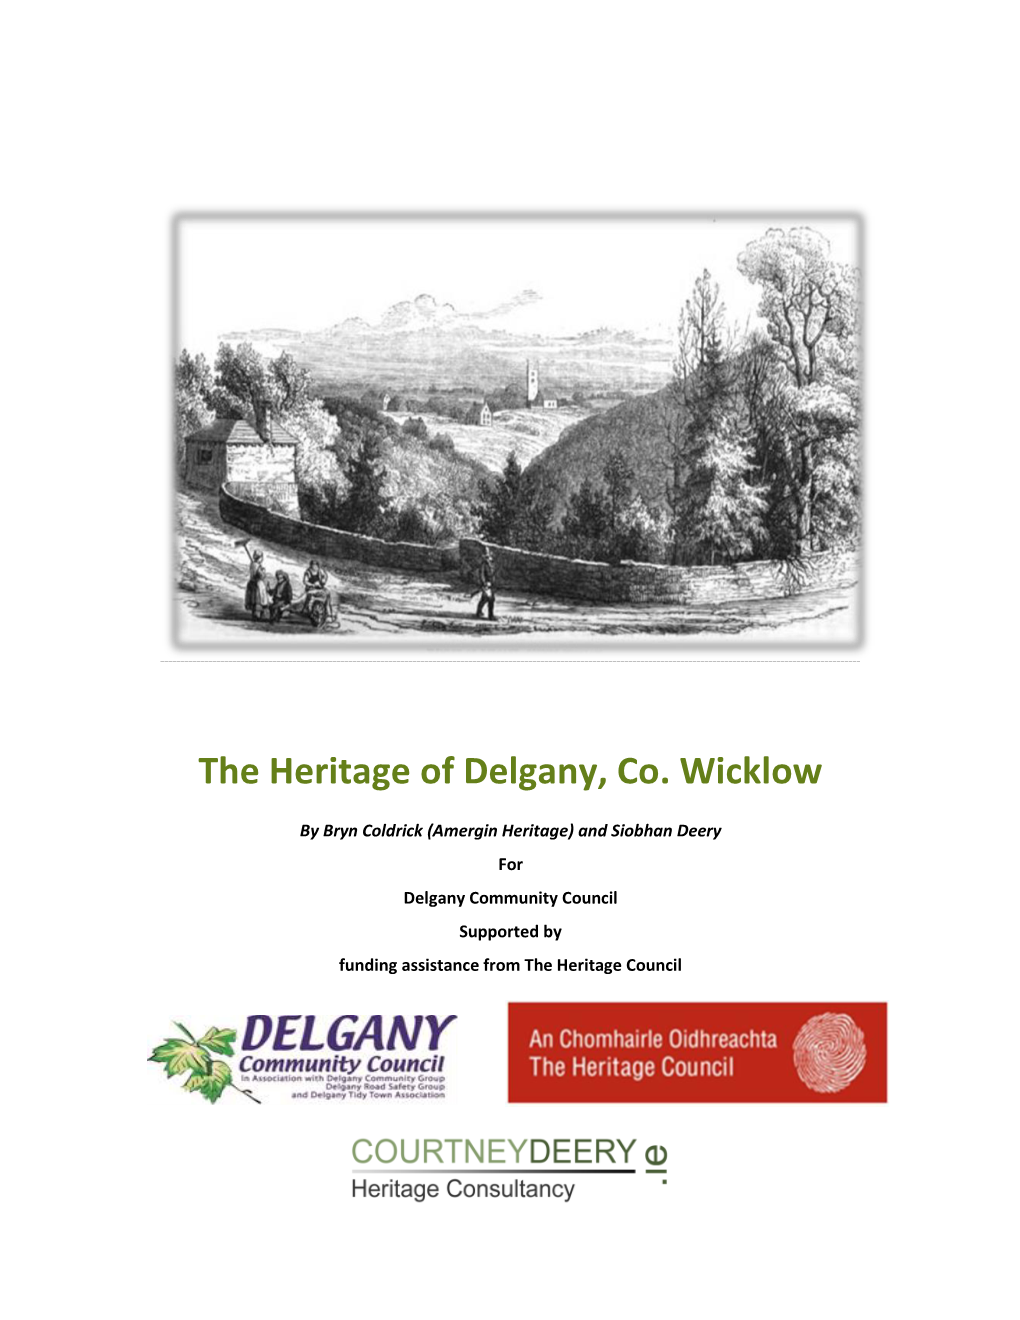 The Heritage of Delgany, Co. Wicklow